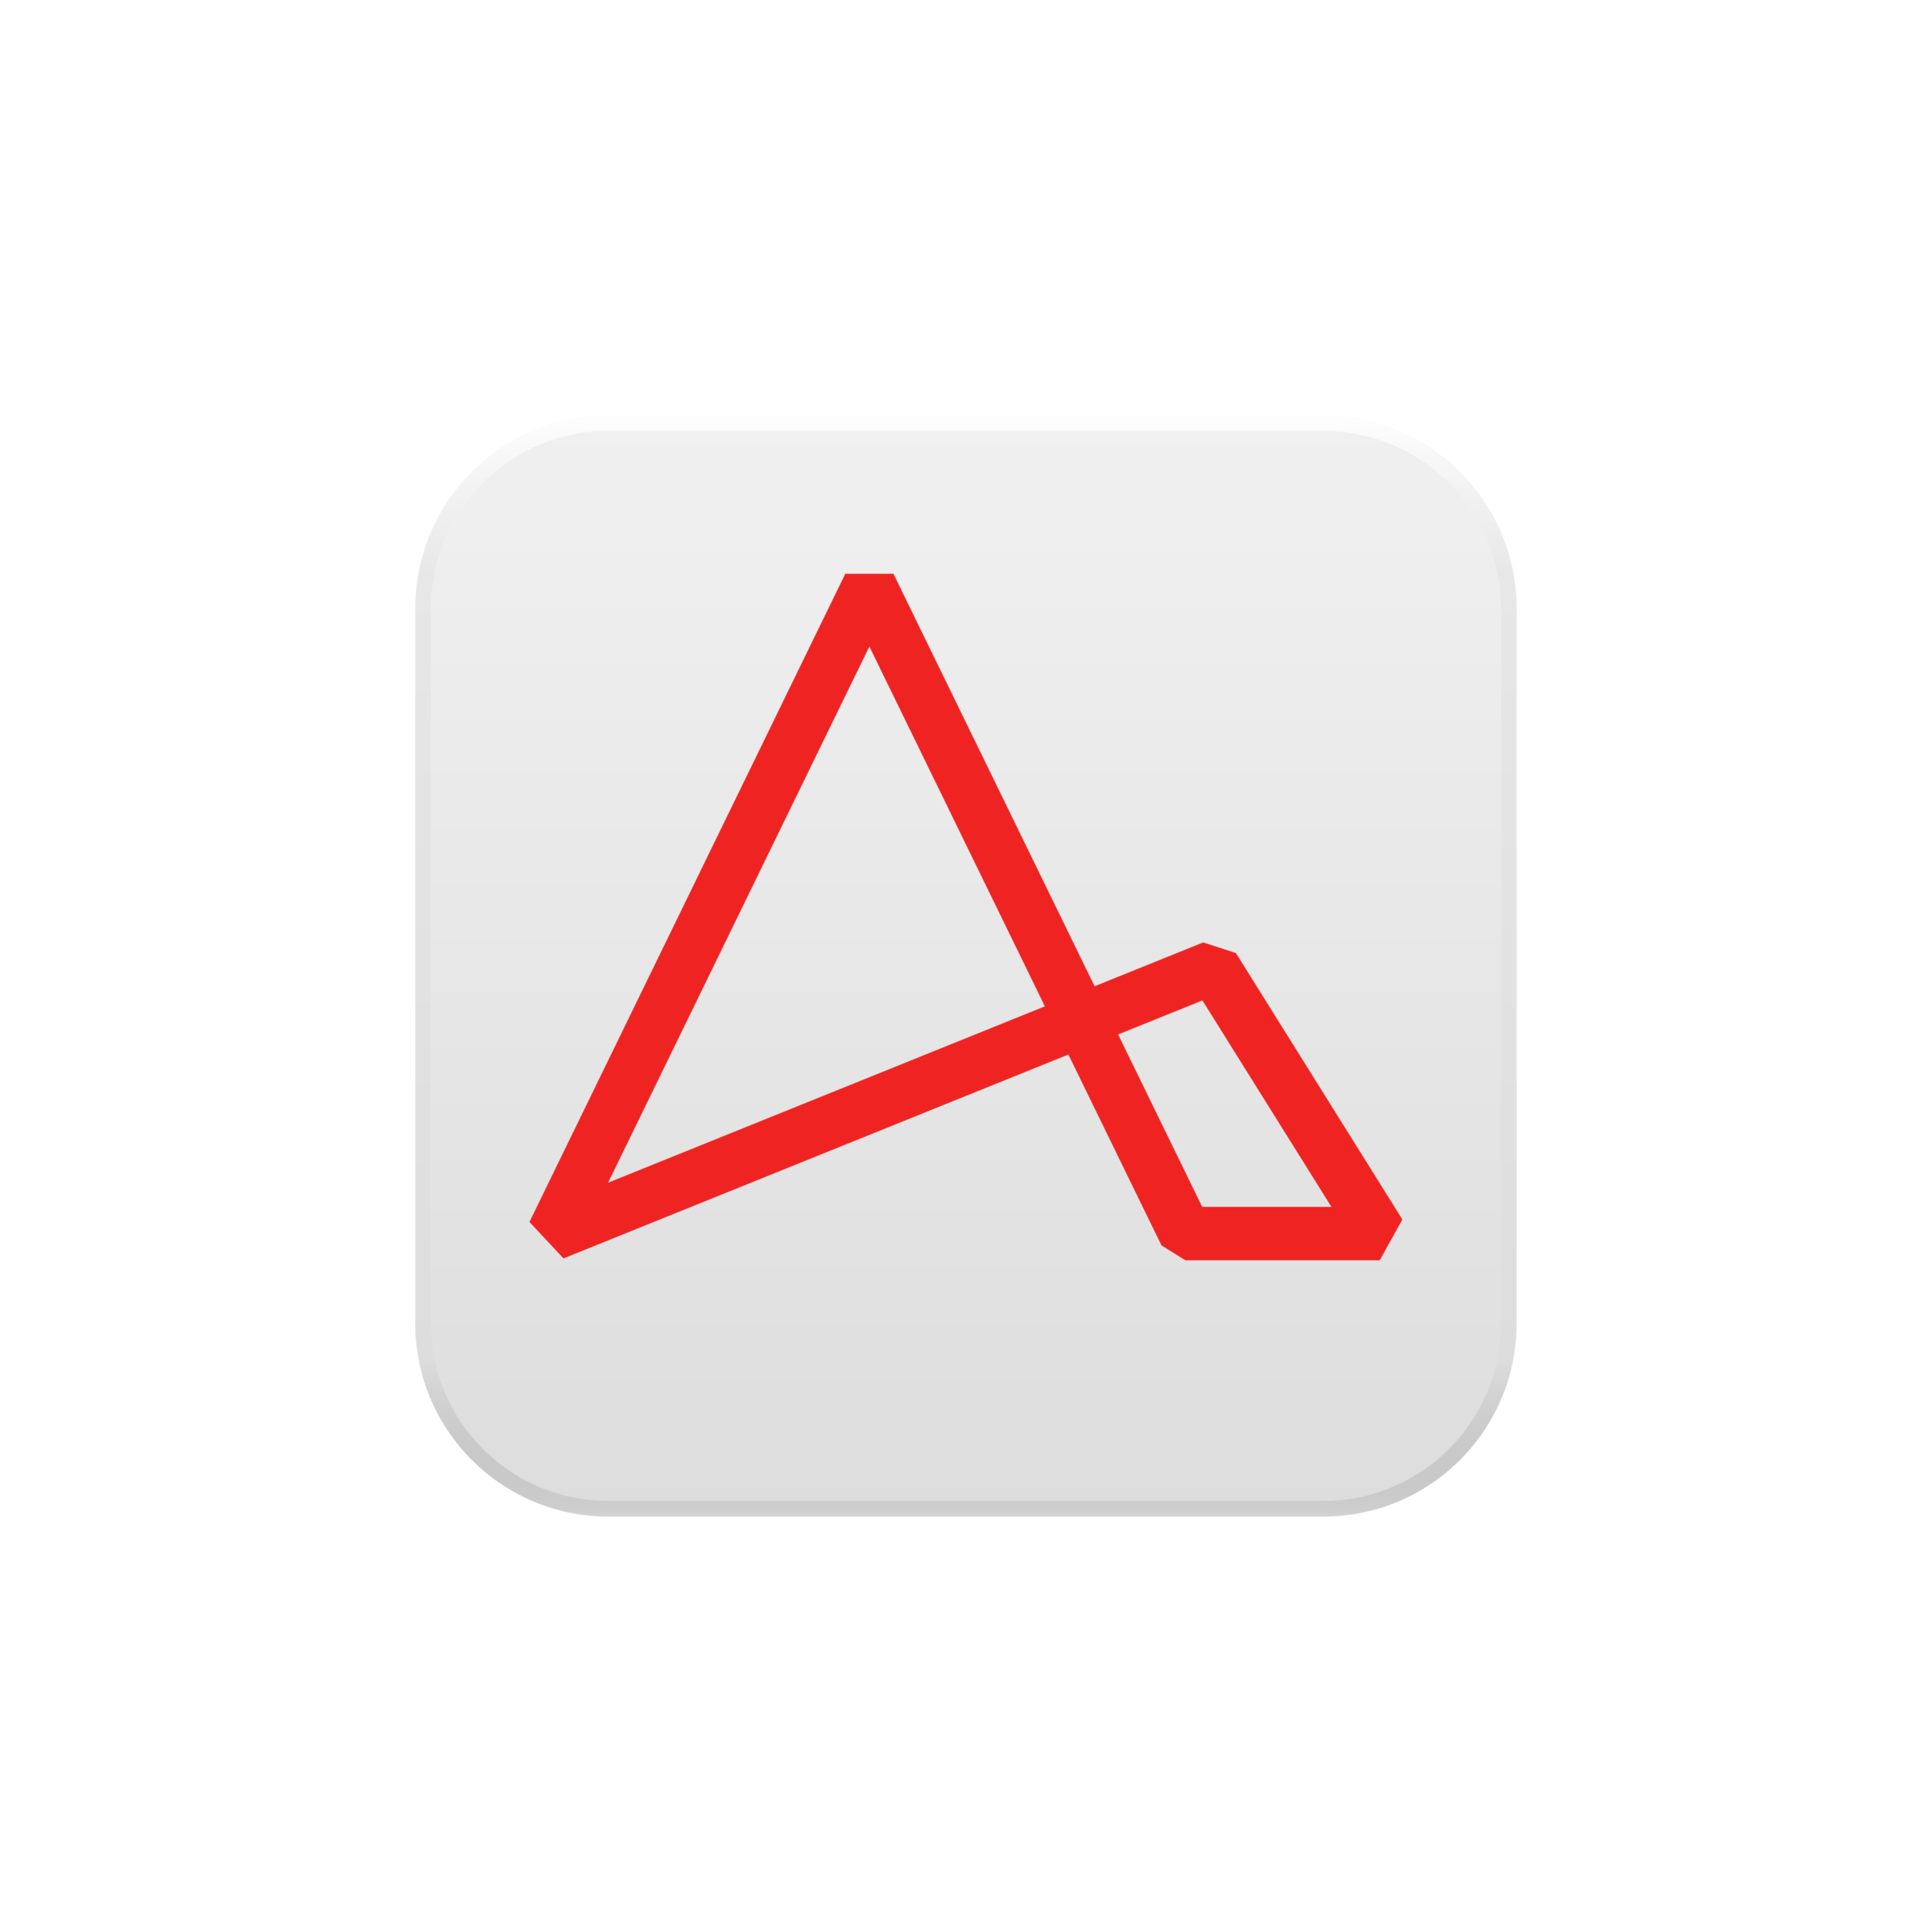 arkana laboratories apple app store and google play store icon for Arkana Labs connect app